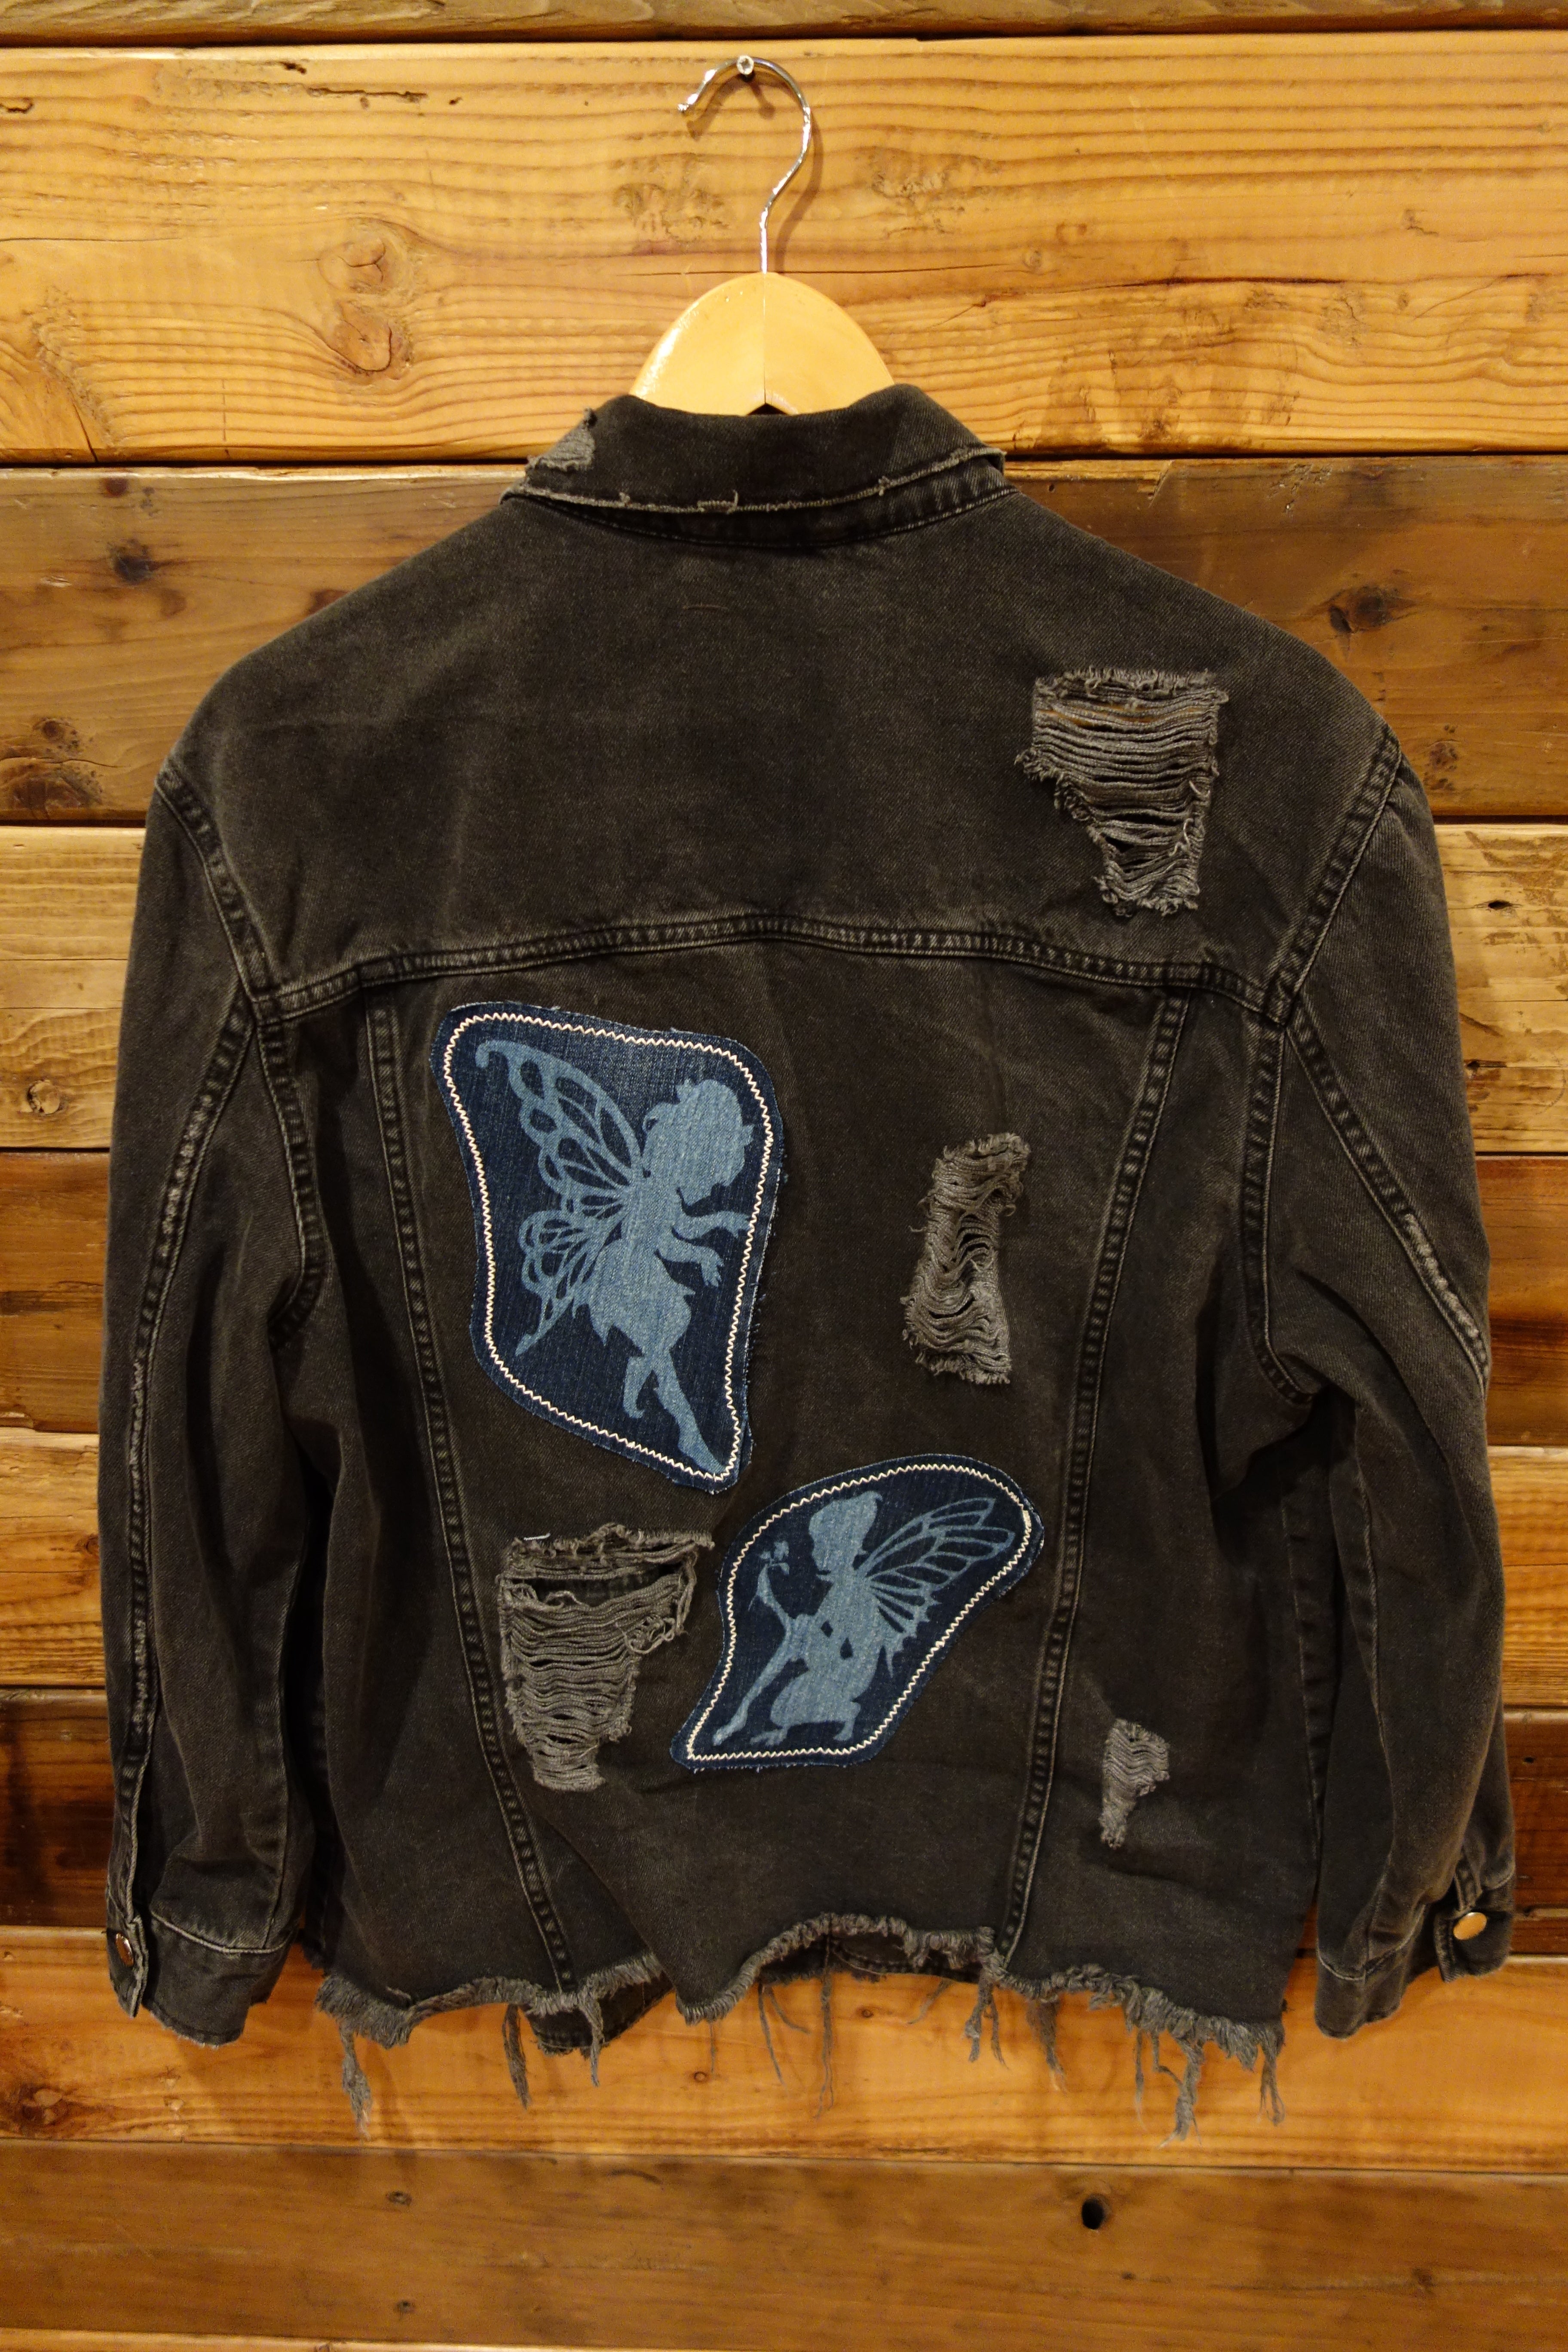 Divided distressed jean jacket, one of a kind, vintage fairies from jeans